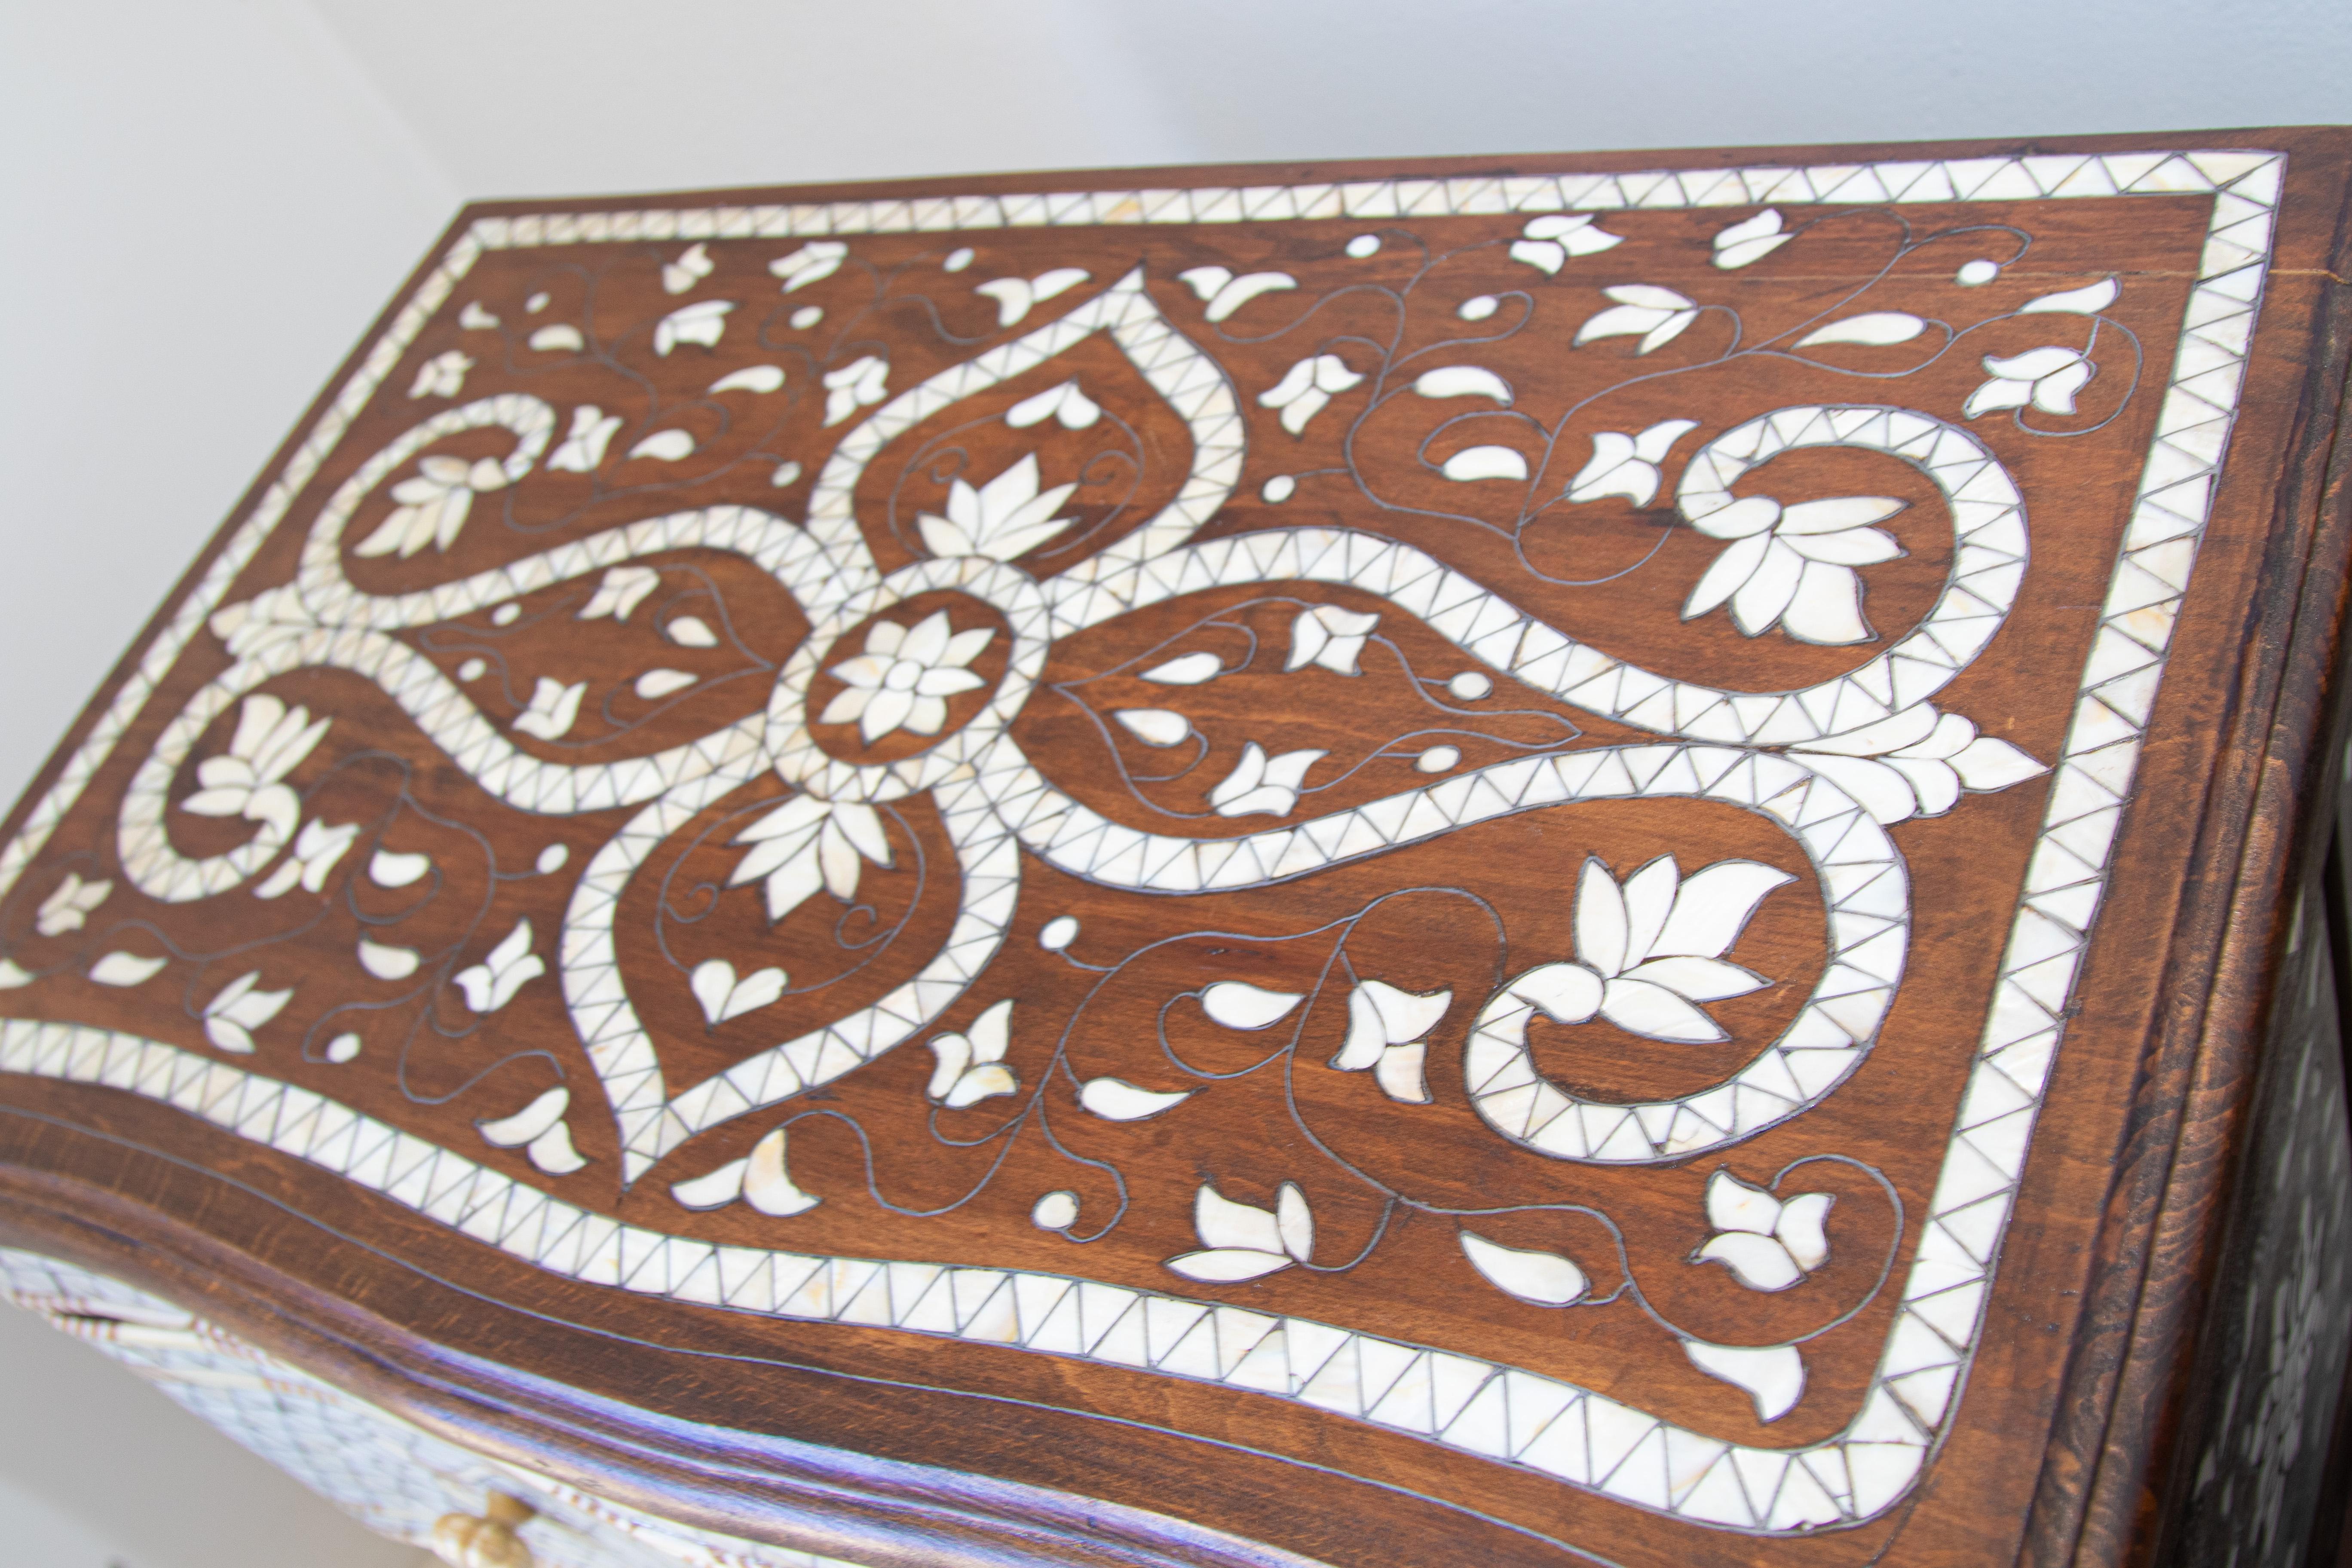 Moorish White Inlay Moroccan Nightstands, a Pair For Sale 1